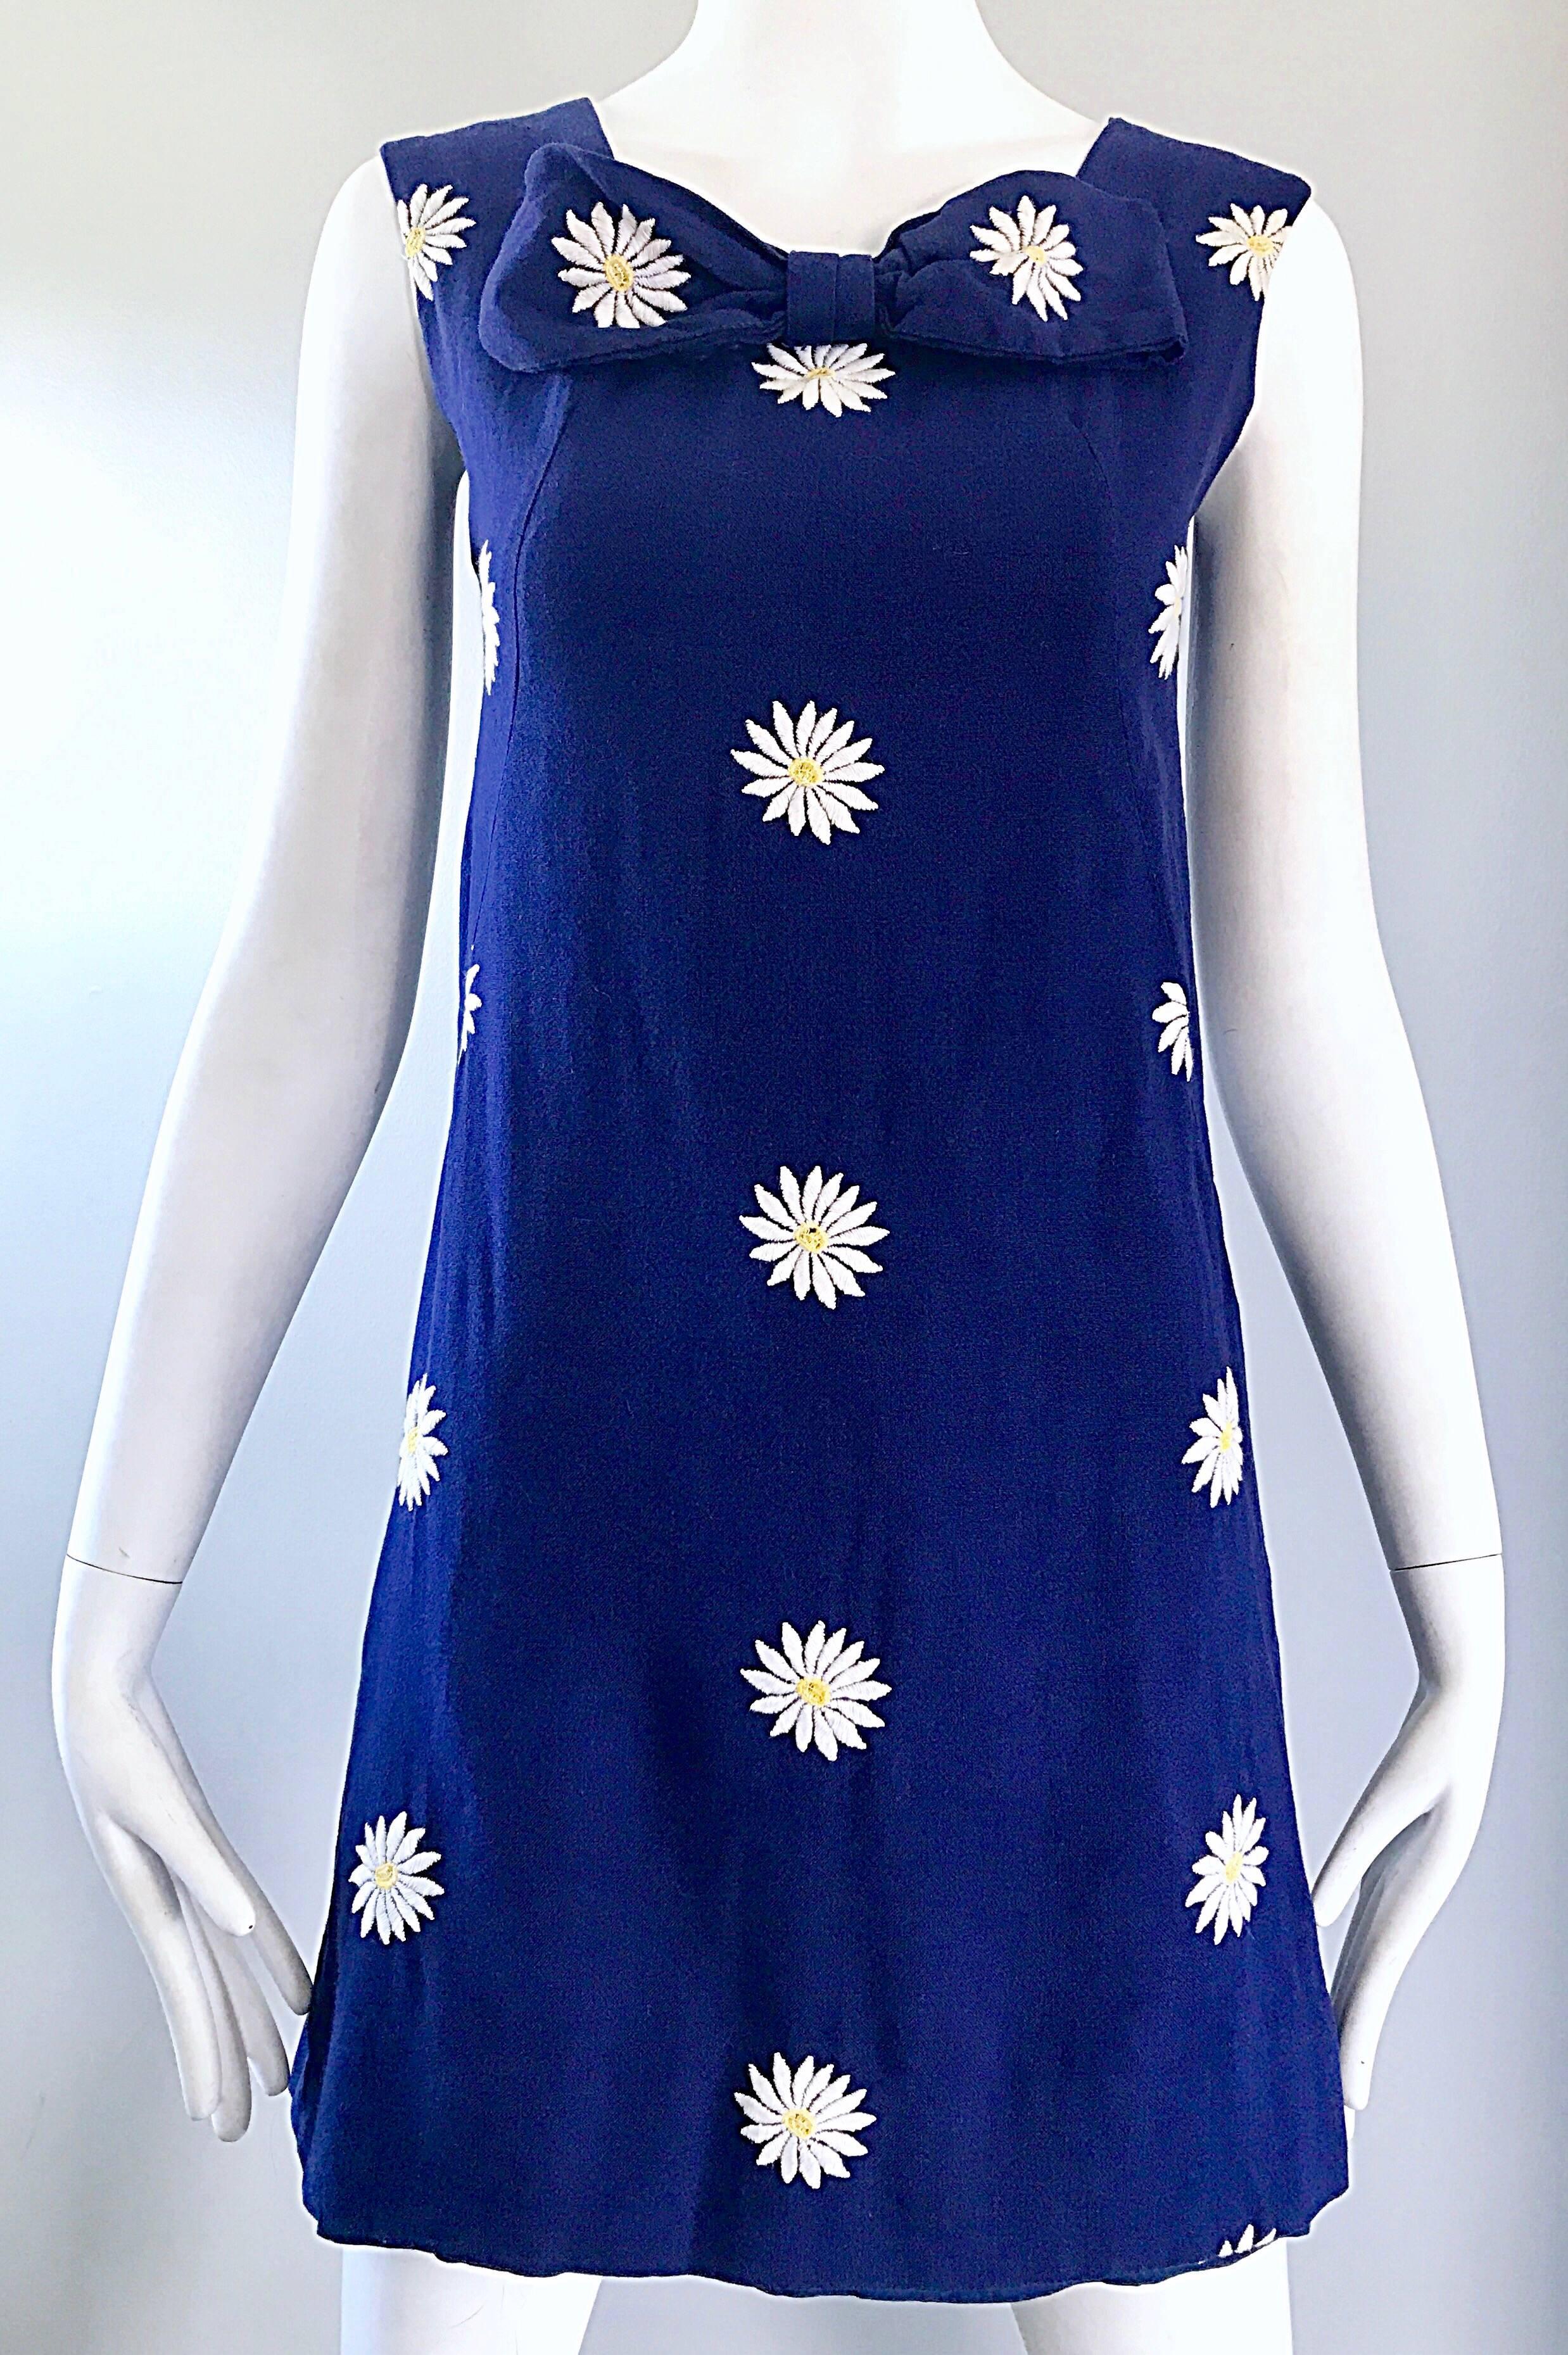 Chic 1960s Navy Blue Cotton Daisy Flower Print Vintage 60s Shift A - Line Dress In Excellent Condition For Sale In San Diego, CA